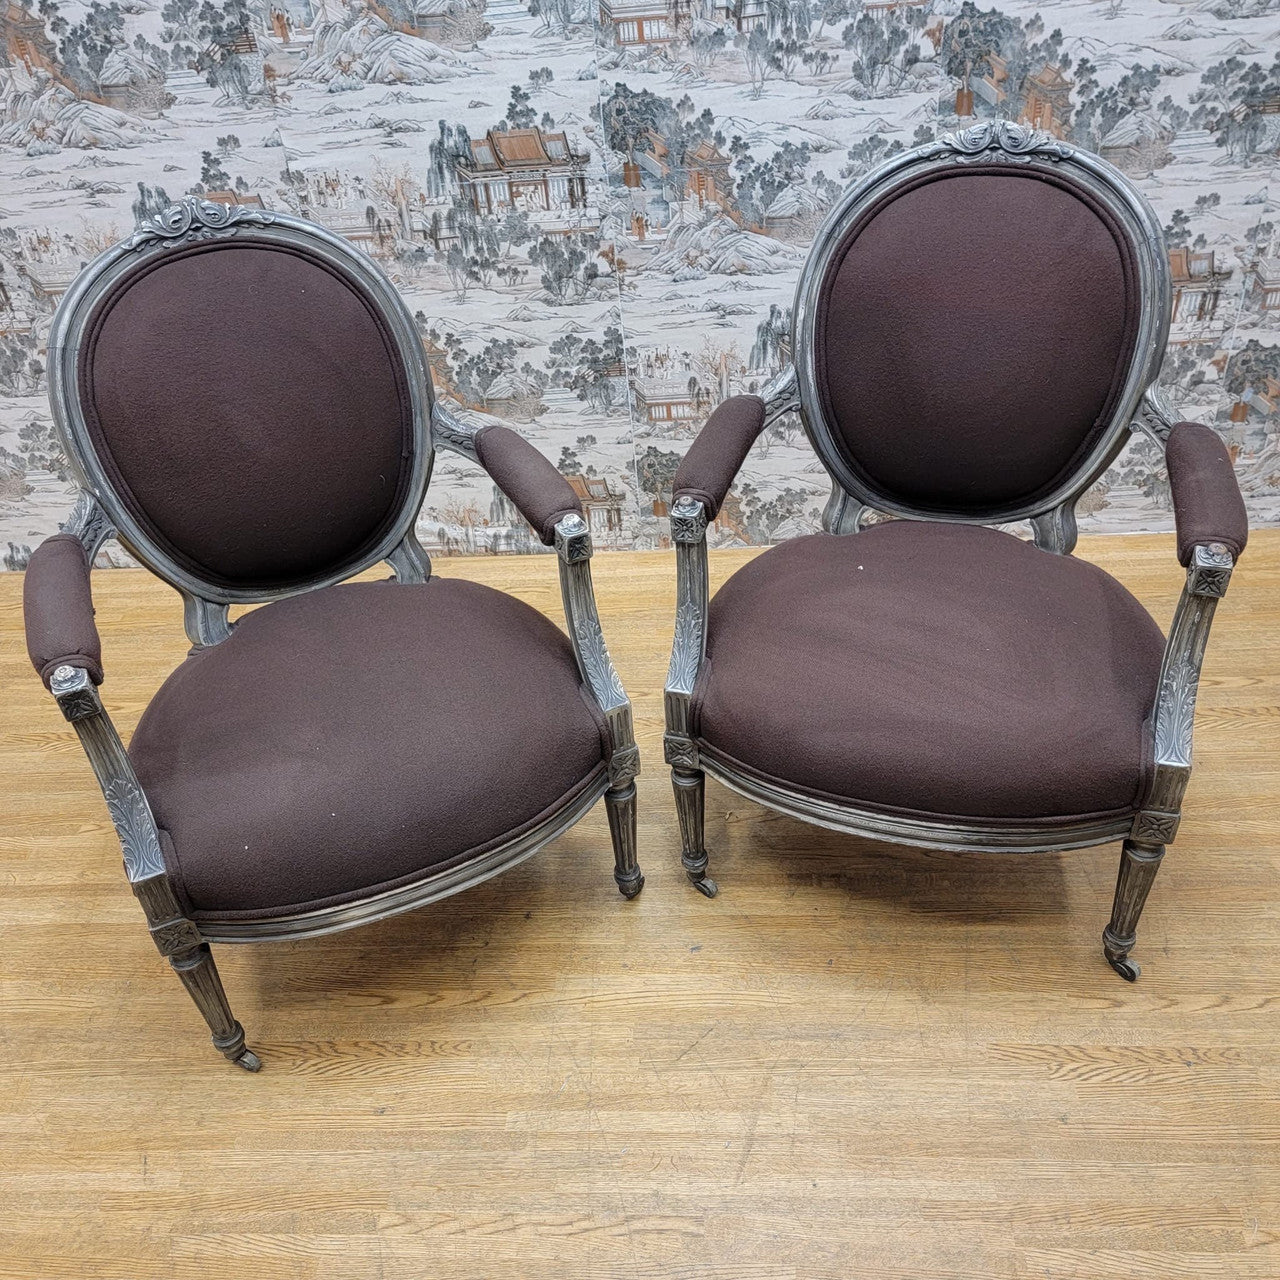 Antique French Louis XVI Style Hand Carved Silver Gilt Framed Fauteuil Armchairs - Pair